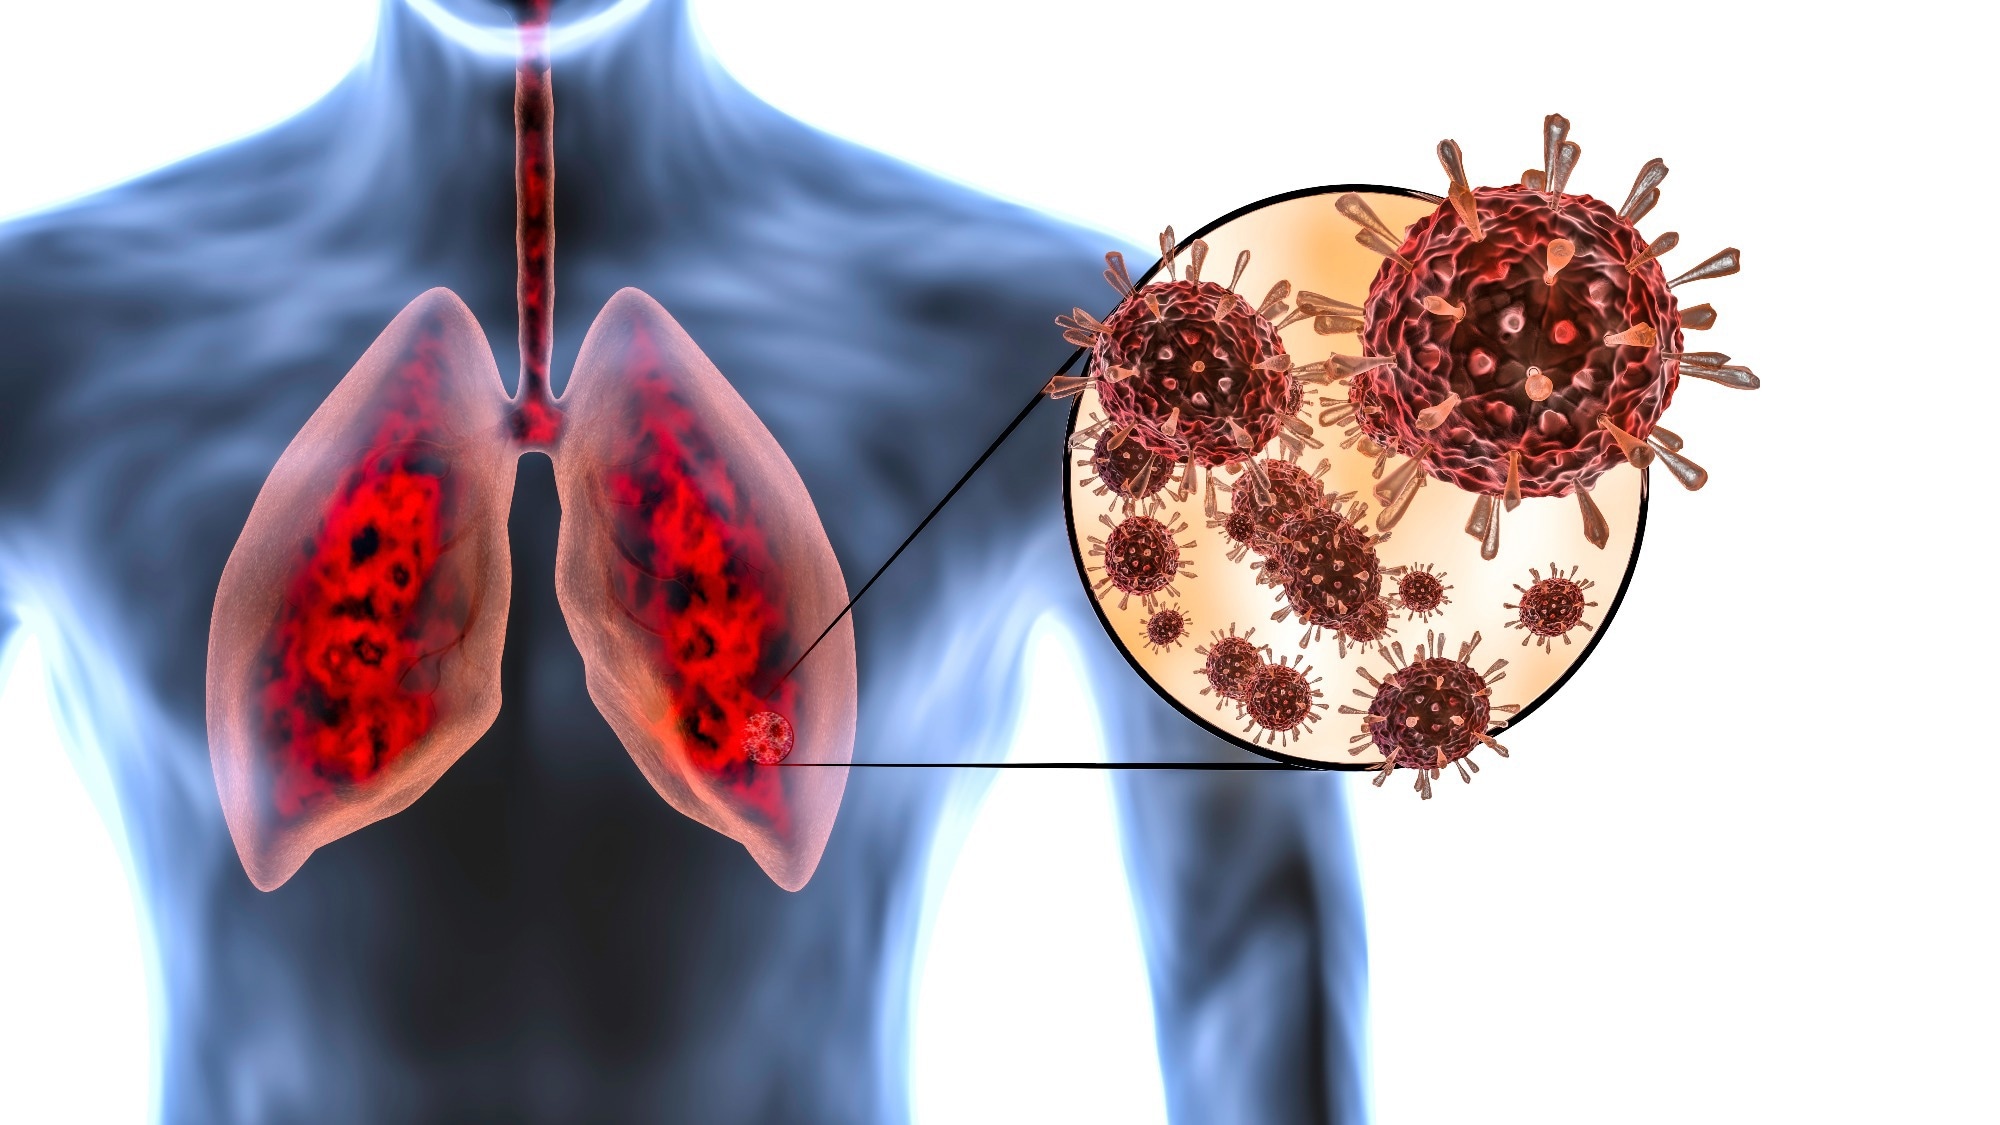 Study: Genetically determined thymic function affects strength and duration of immune response in COVID patients with pneumonia. ​​​​​​​Image Credit: MarcinWojc / Shutterstock